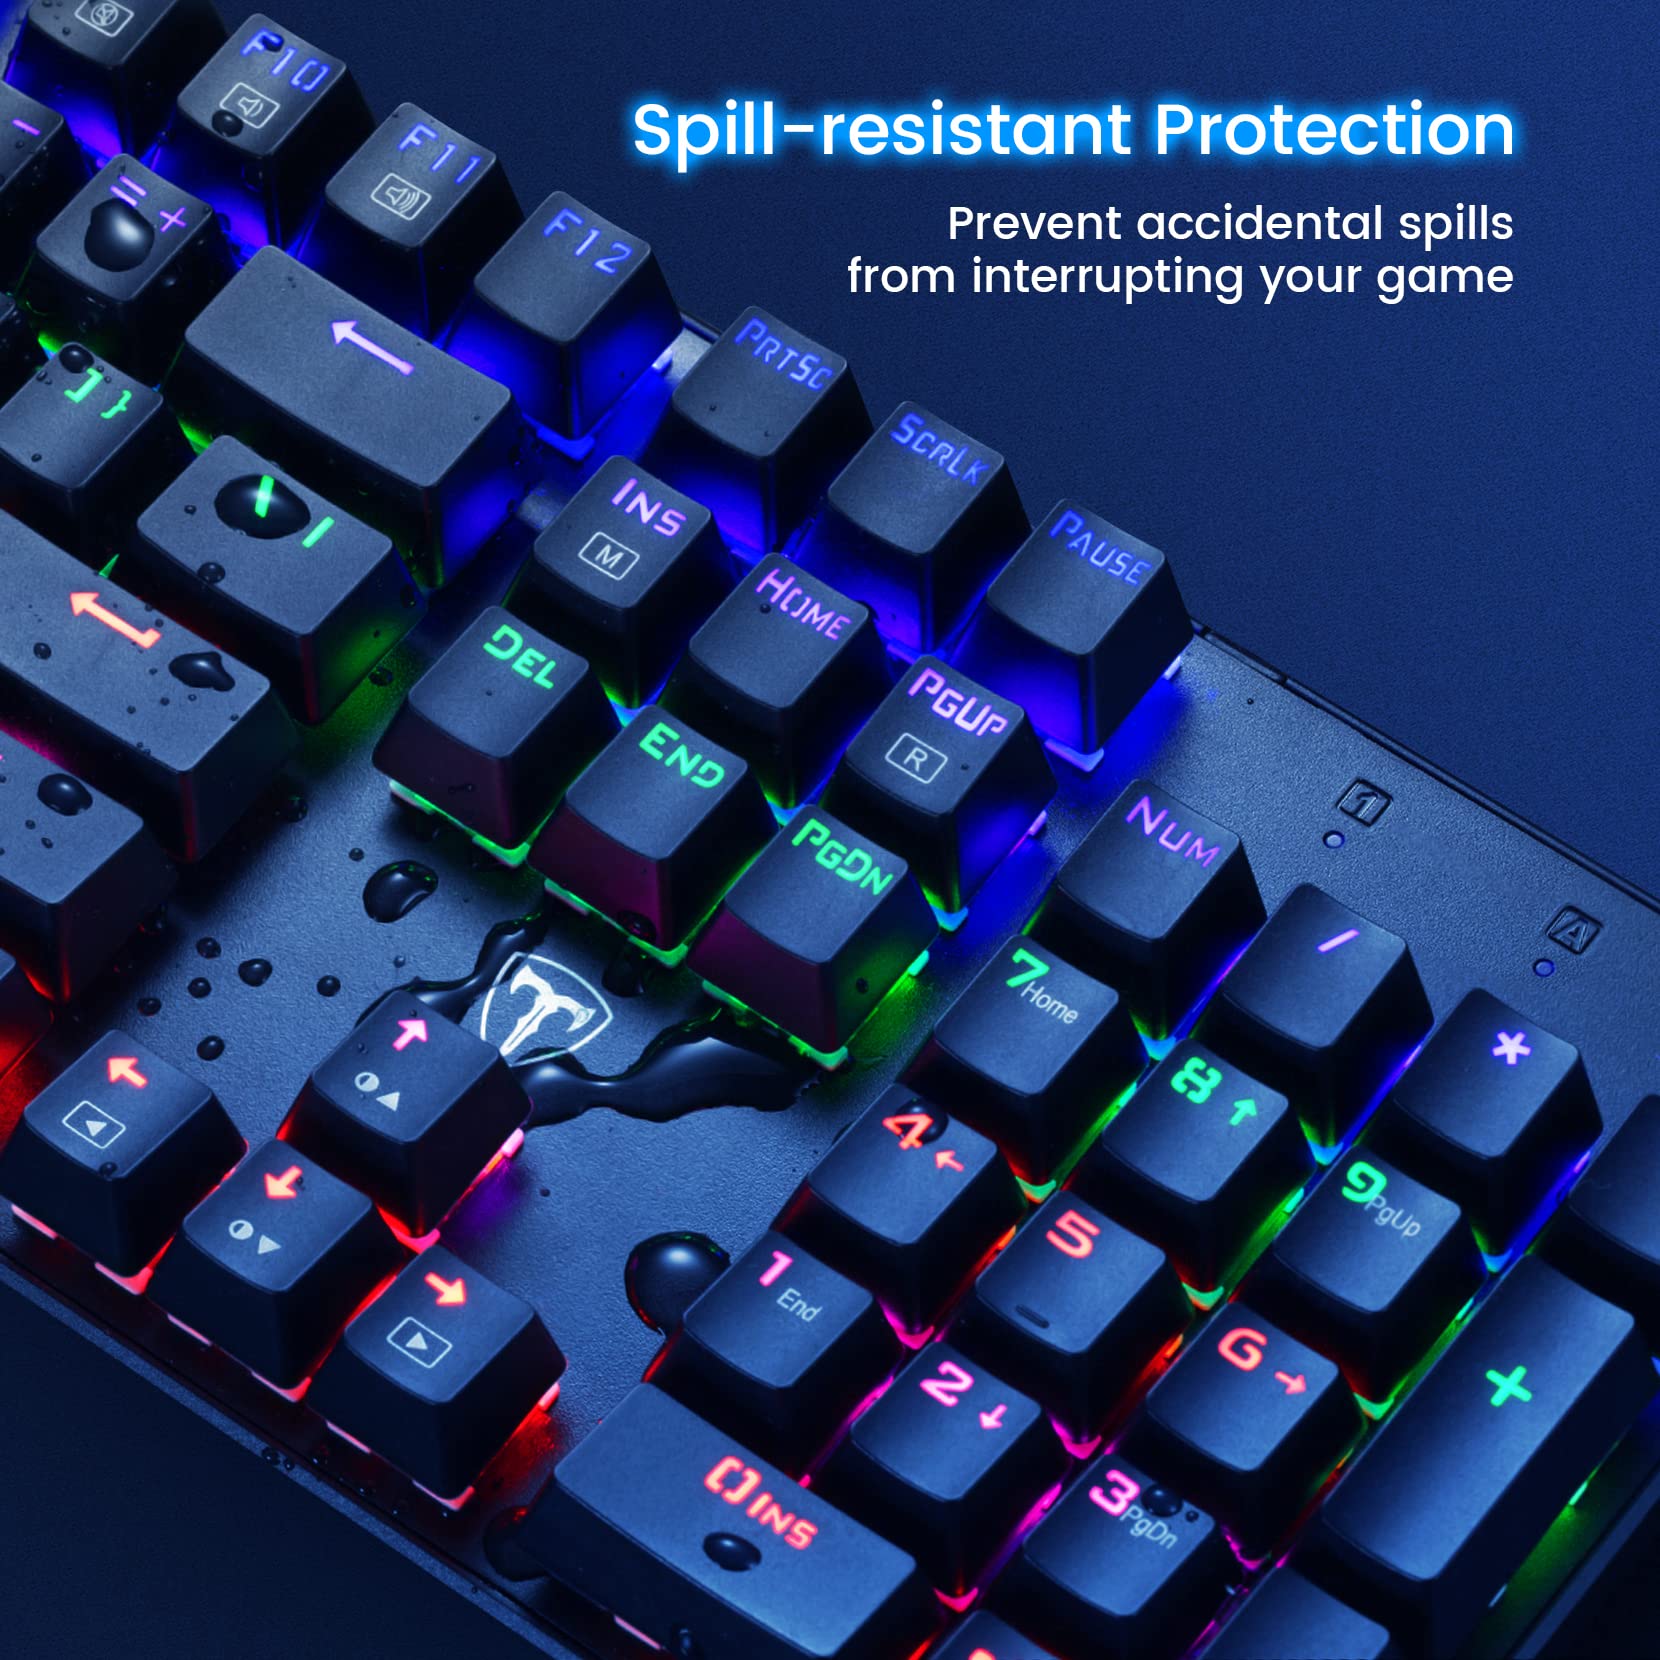 RisoPhy Mechanical Gaming Keyboard, RGB 104 Keys Ultra-Slim LED Backlit USB Wired Keyboard with Blue Switch, Durable ABS Keycaps/Anti-Ghosting/Spill-Resistant for PC Mac Xbox Gamer